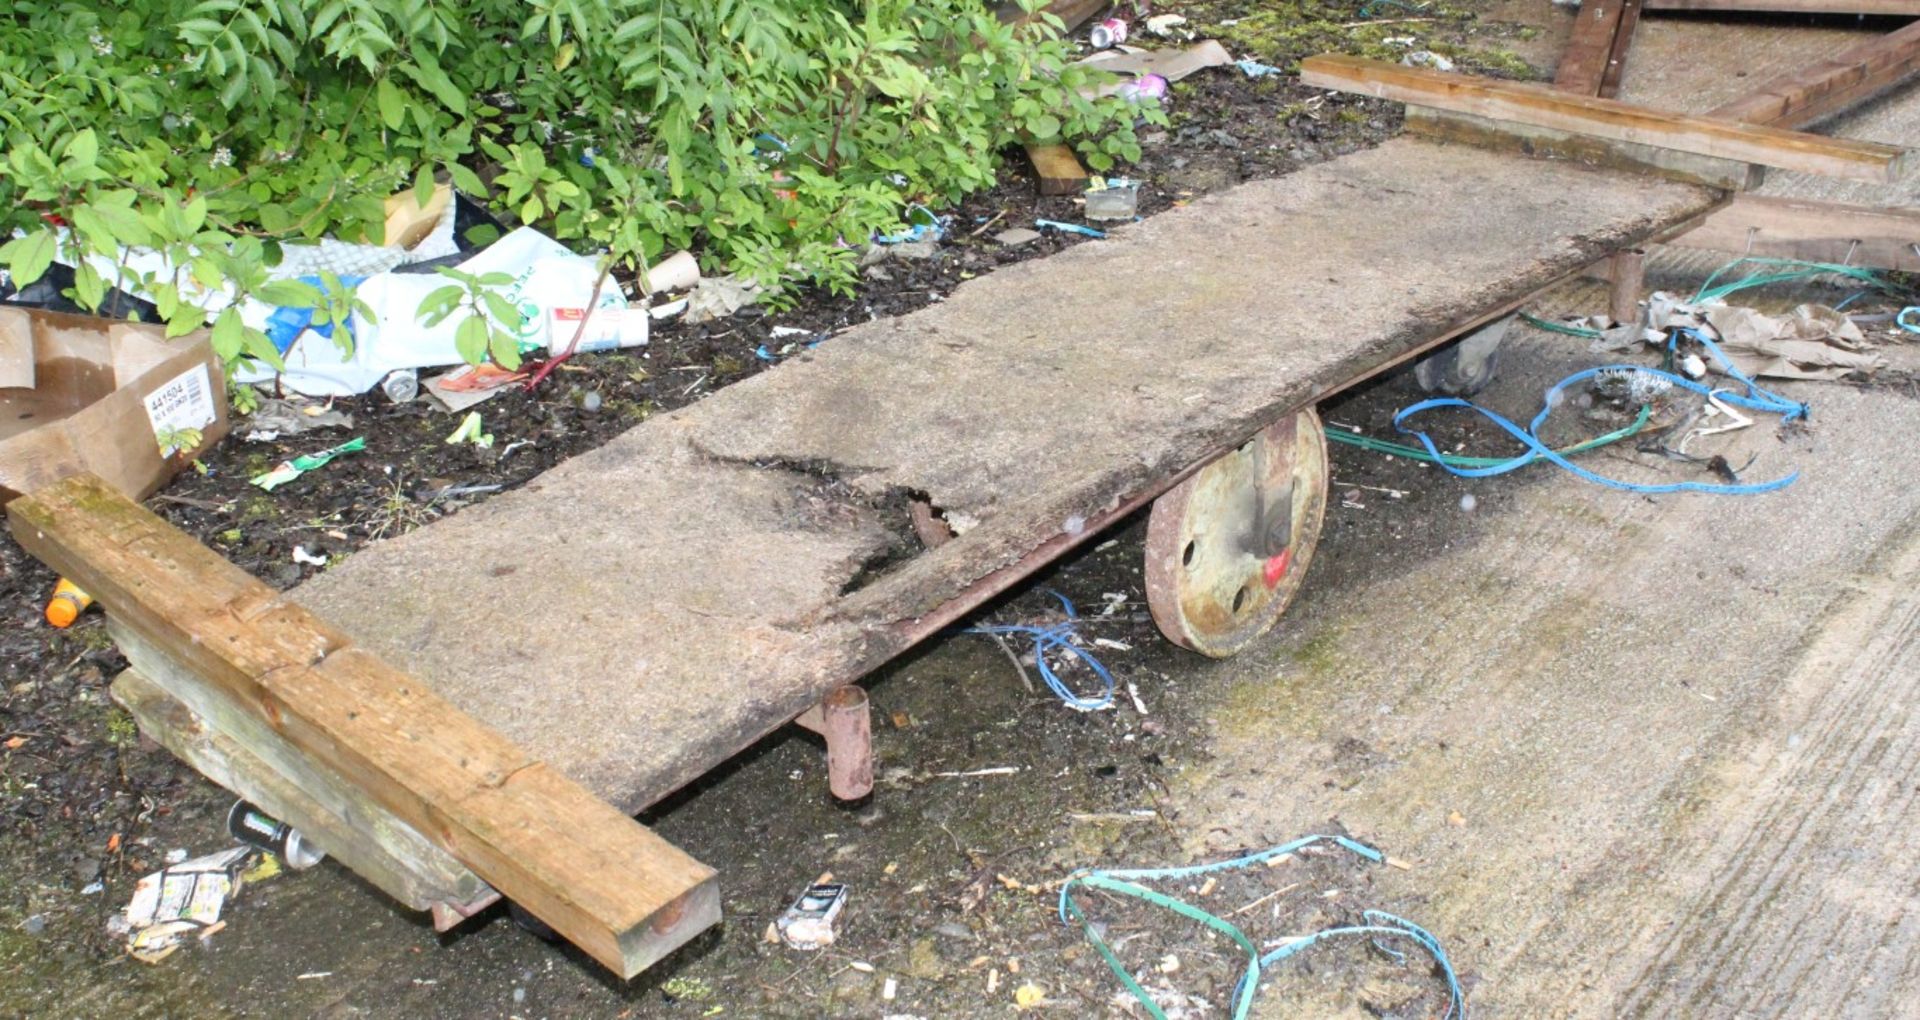 1 x Flatbed Trolley - CL151 - Location: Manchester